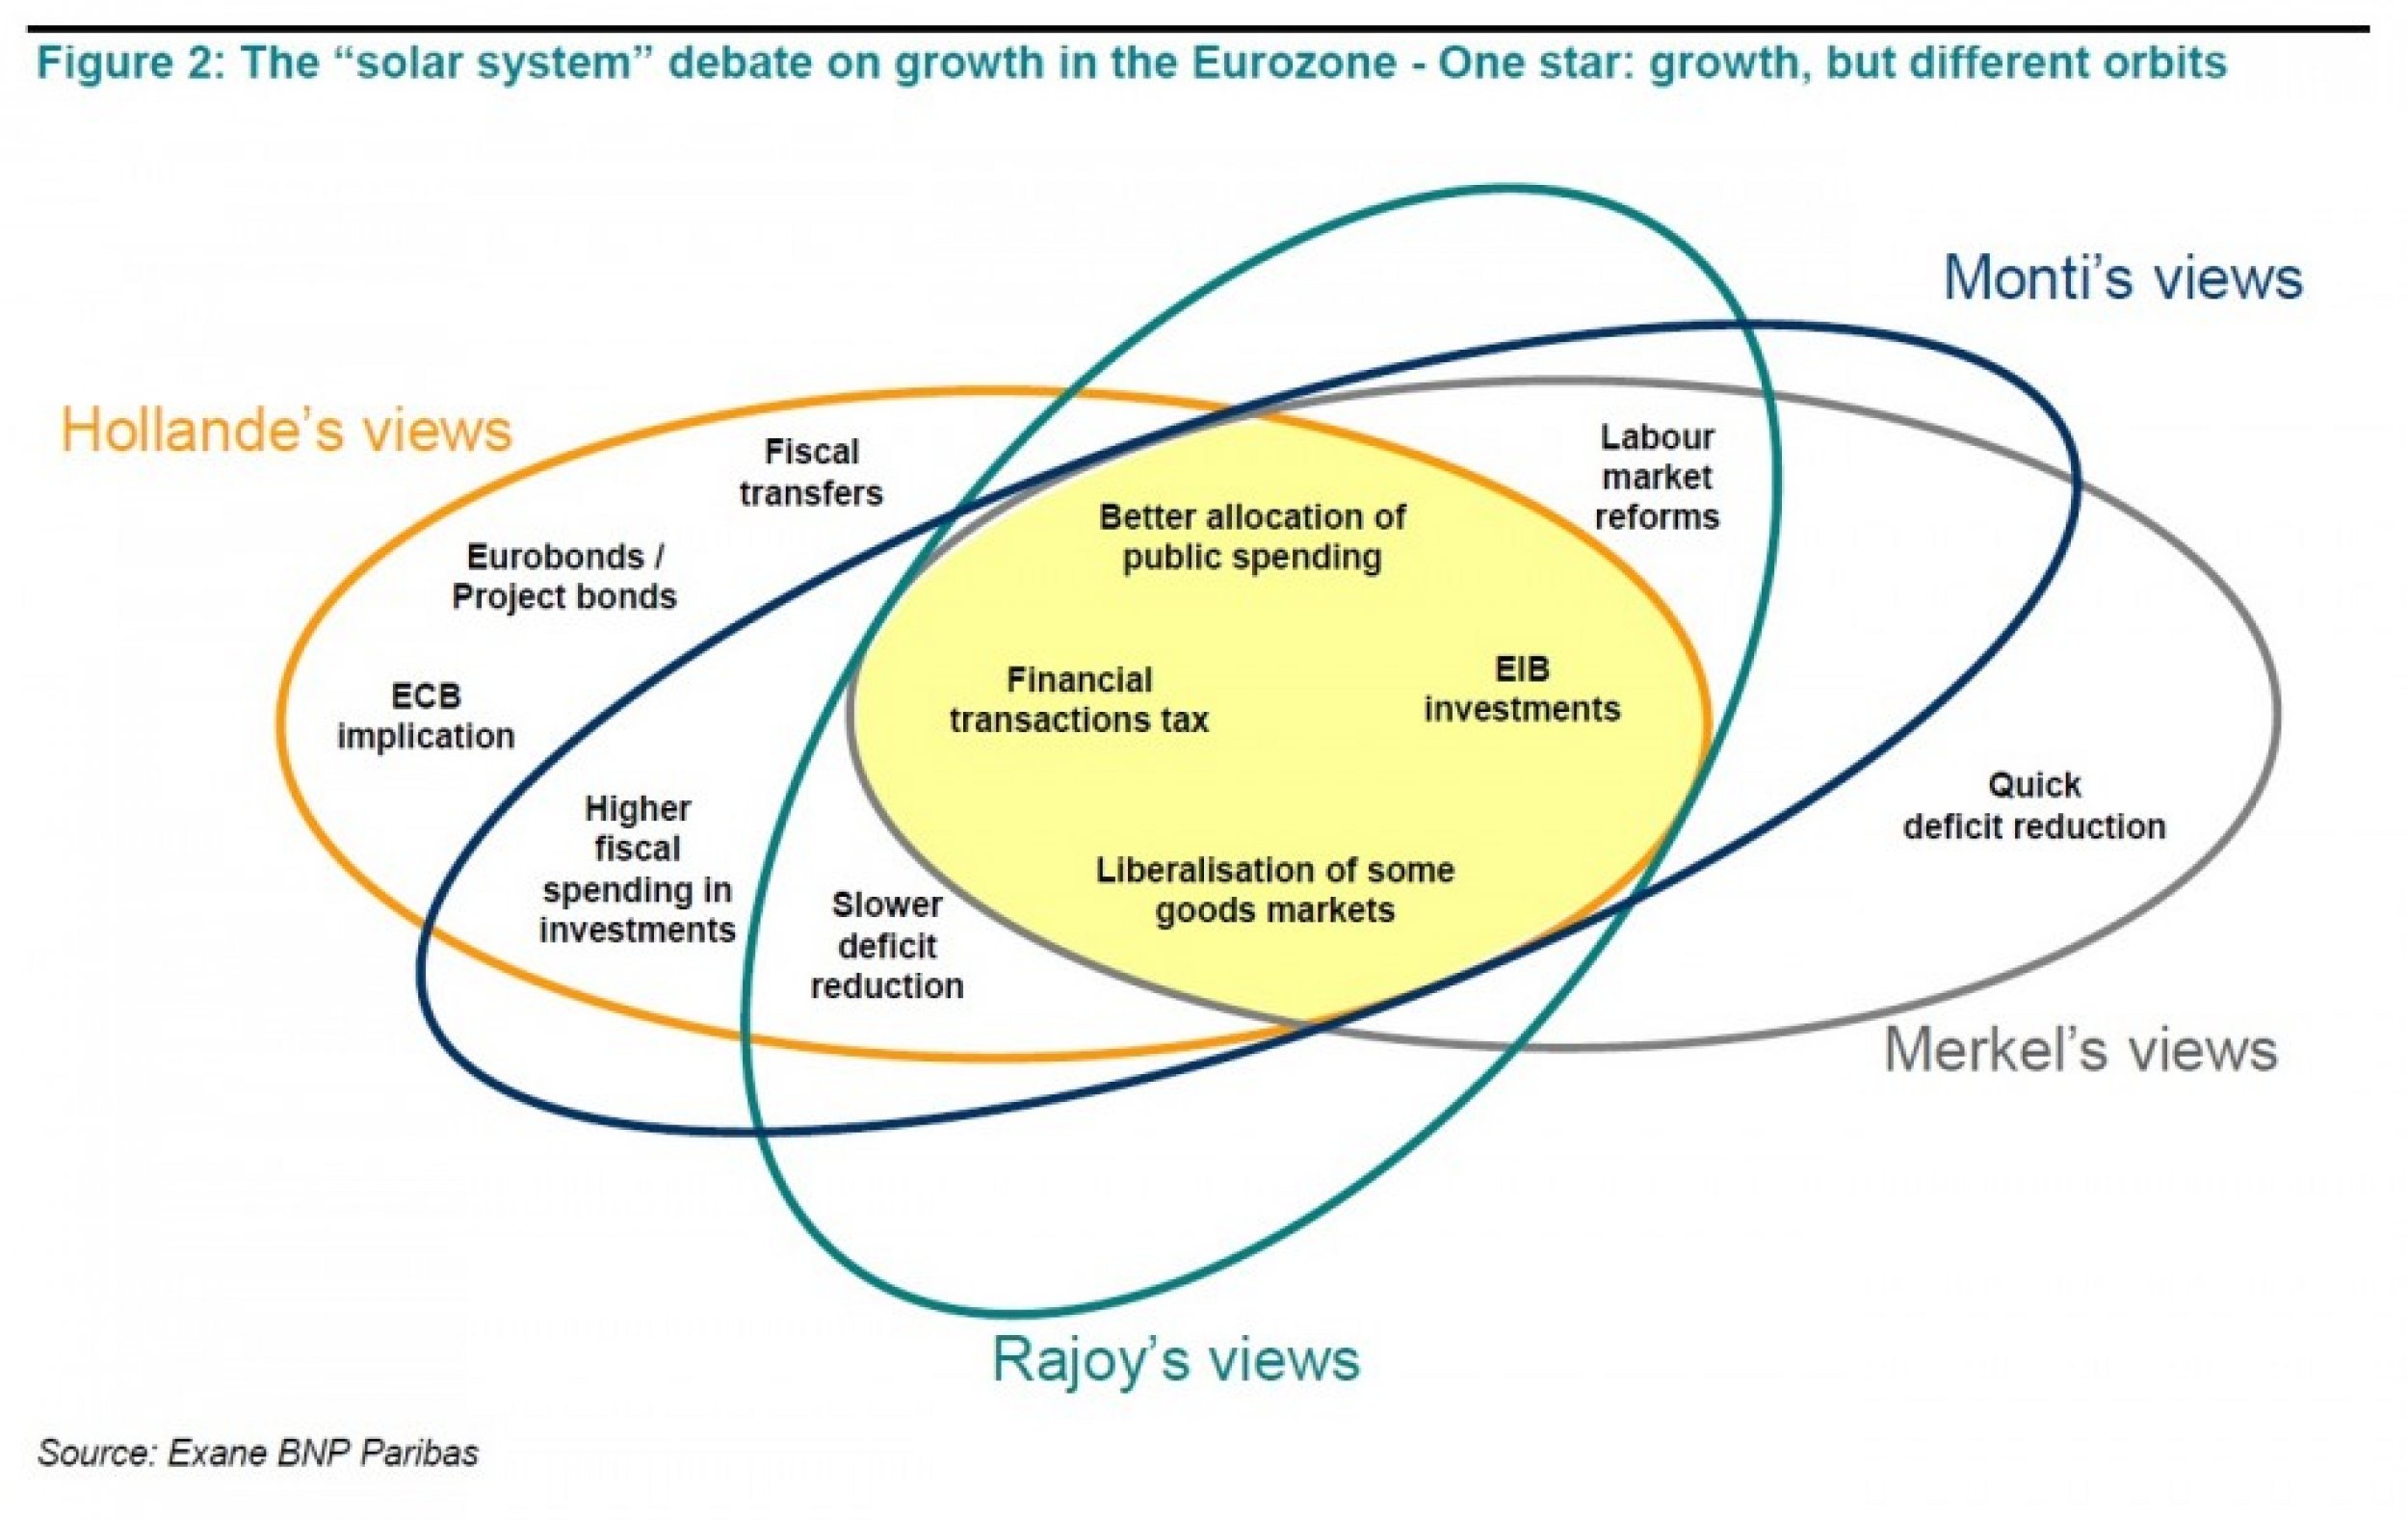 An eye-catching illustration included in a report by BNP Paribas Exane explains why the Continents leader seem unable to solve the ever-worsening eurozone crisis in spite of being ostensibly committed to the same goals, top policy-makers disagree on the